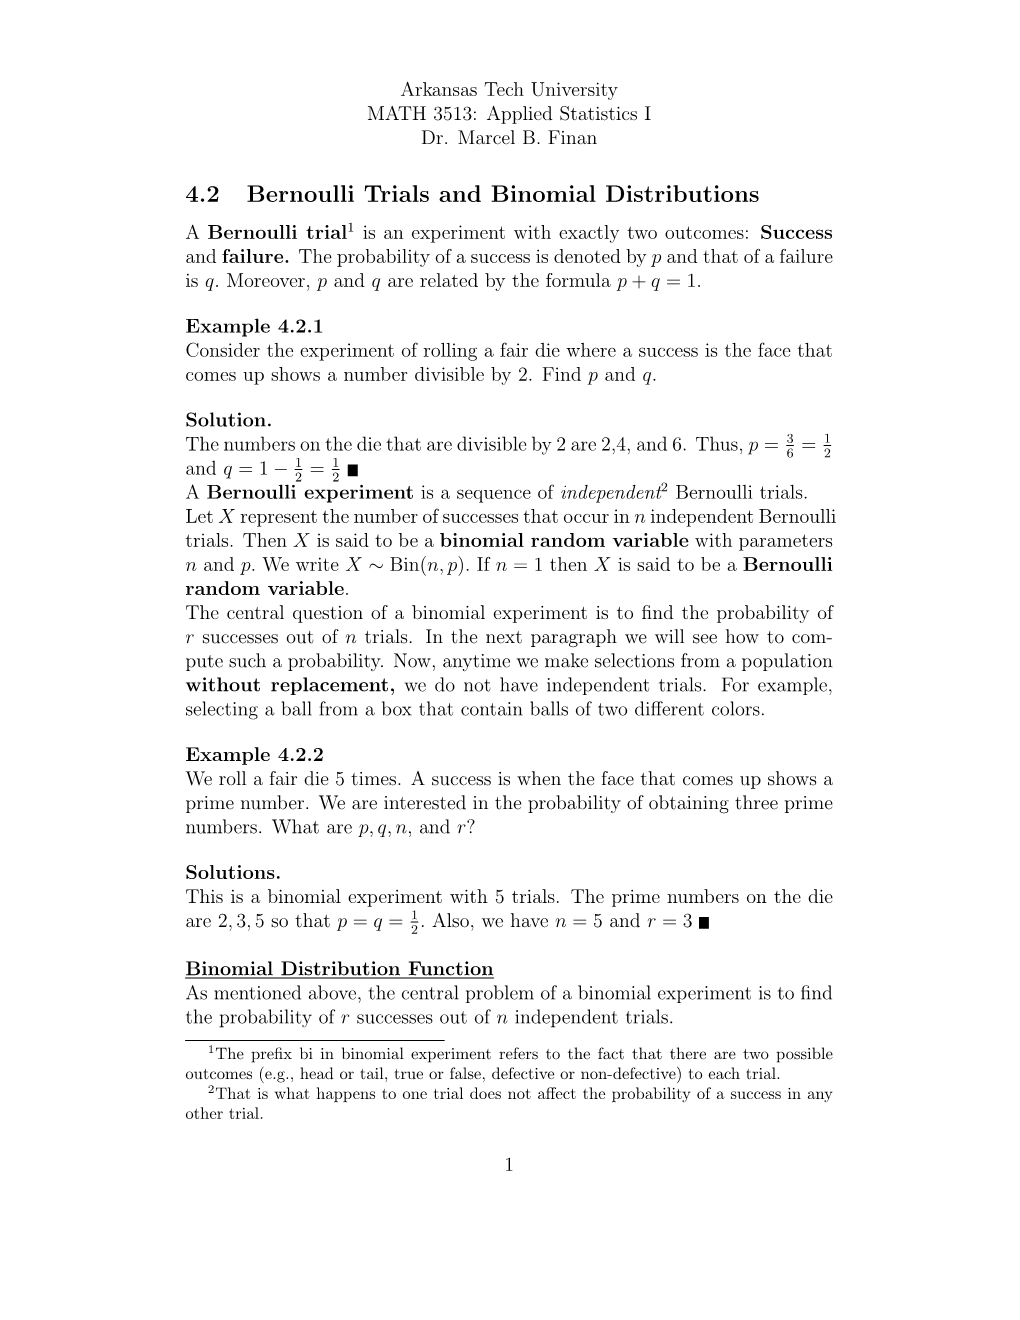 4.2 Bernoulli Trials and Binomial Distributions a Bernoulli Trial1 Is an Experiment with Exactly Two Outcomes: Success and Failure